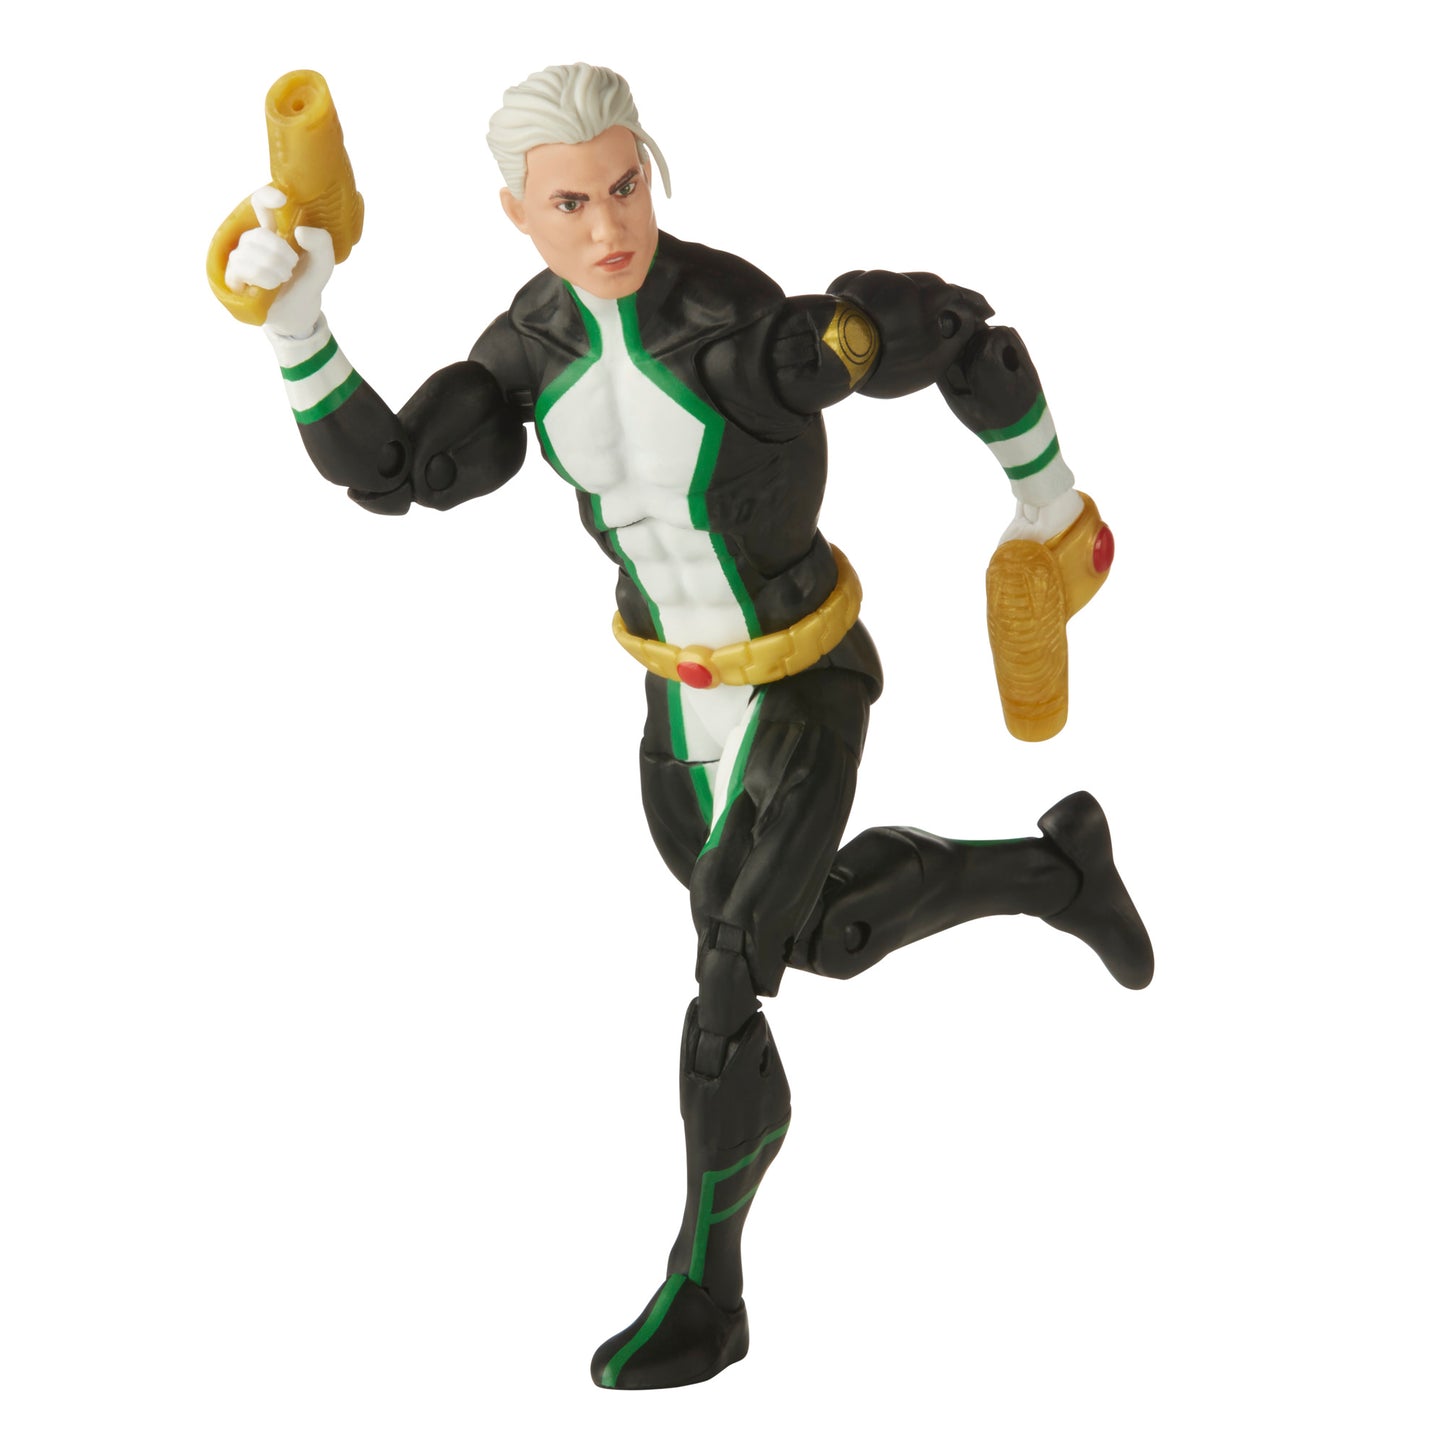 Marvel Legends Series Marvel Comics Marvel Boy Action Figure in a pose with the guns - Heretoserveyou